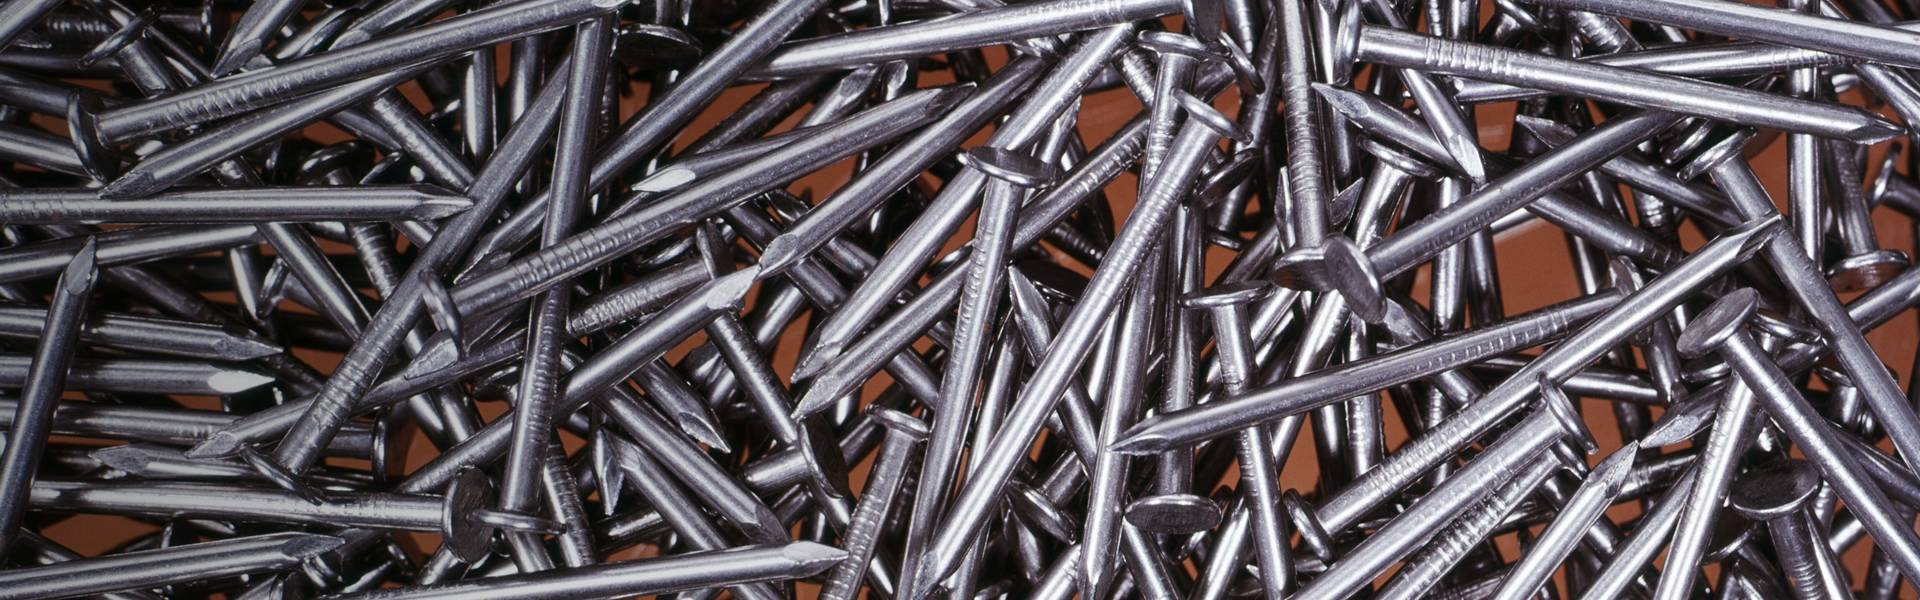 Several stainless steel common nails.